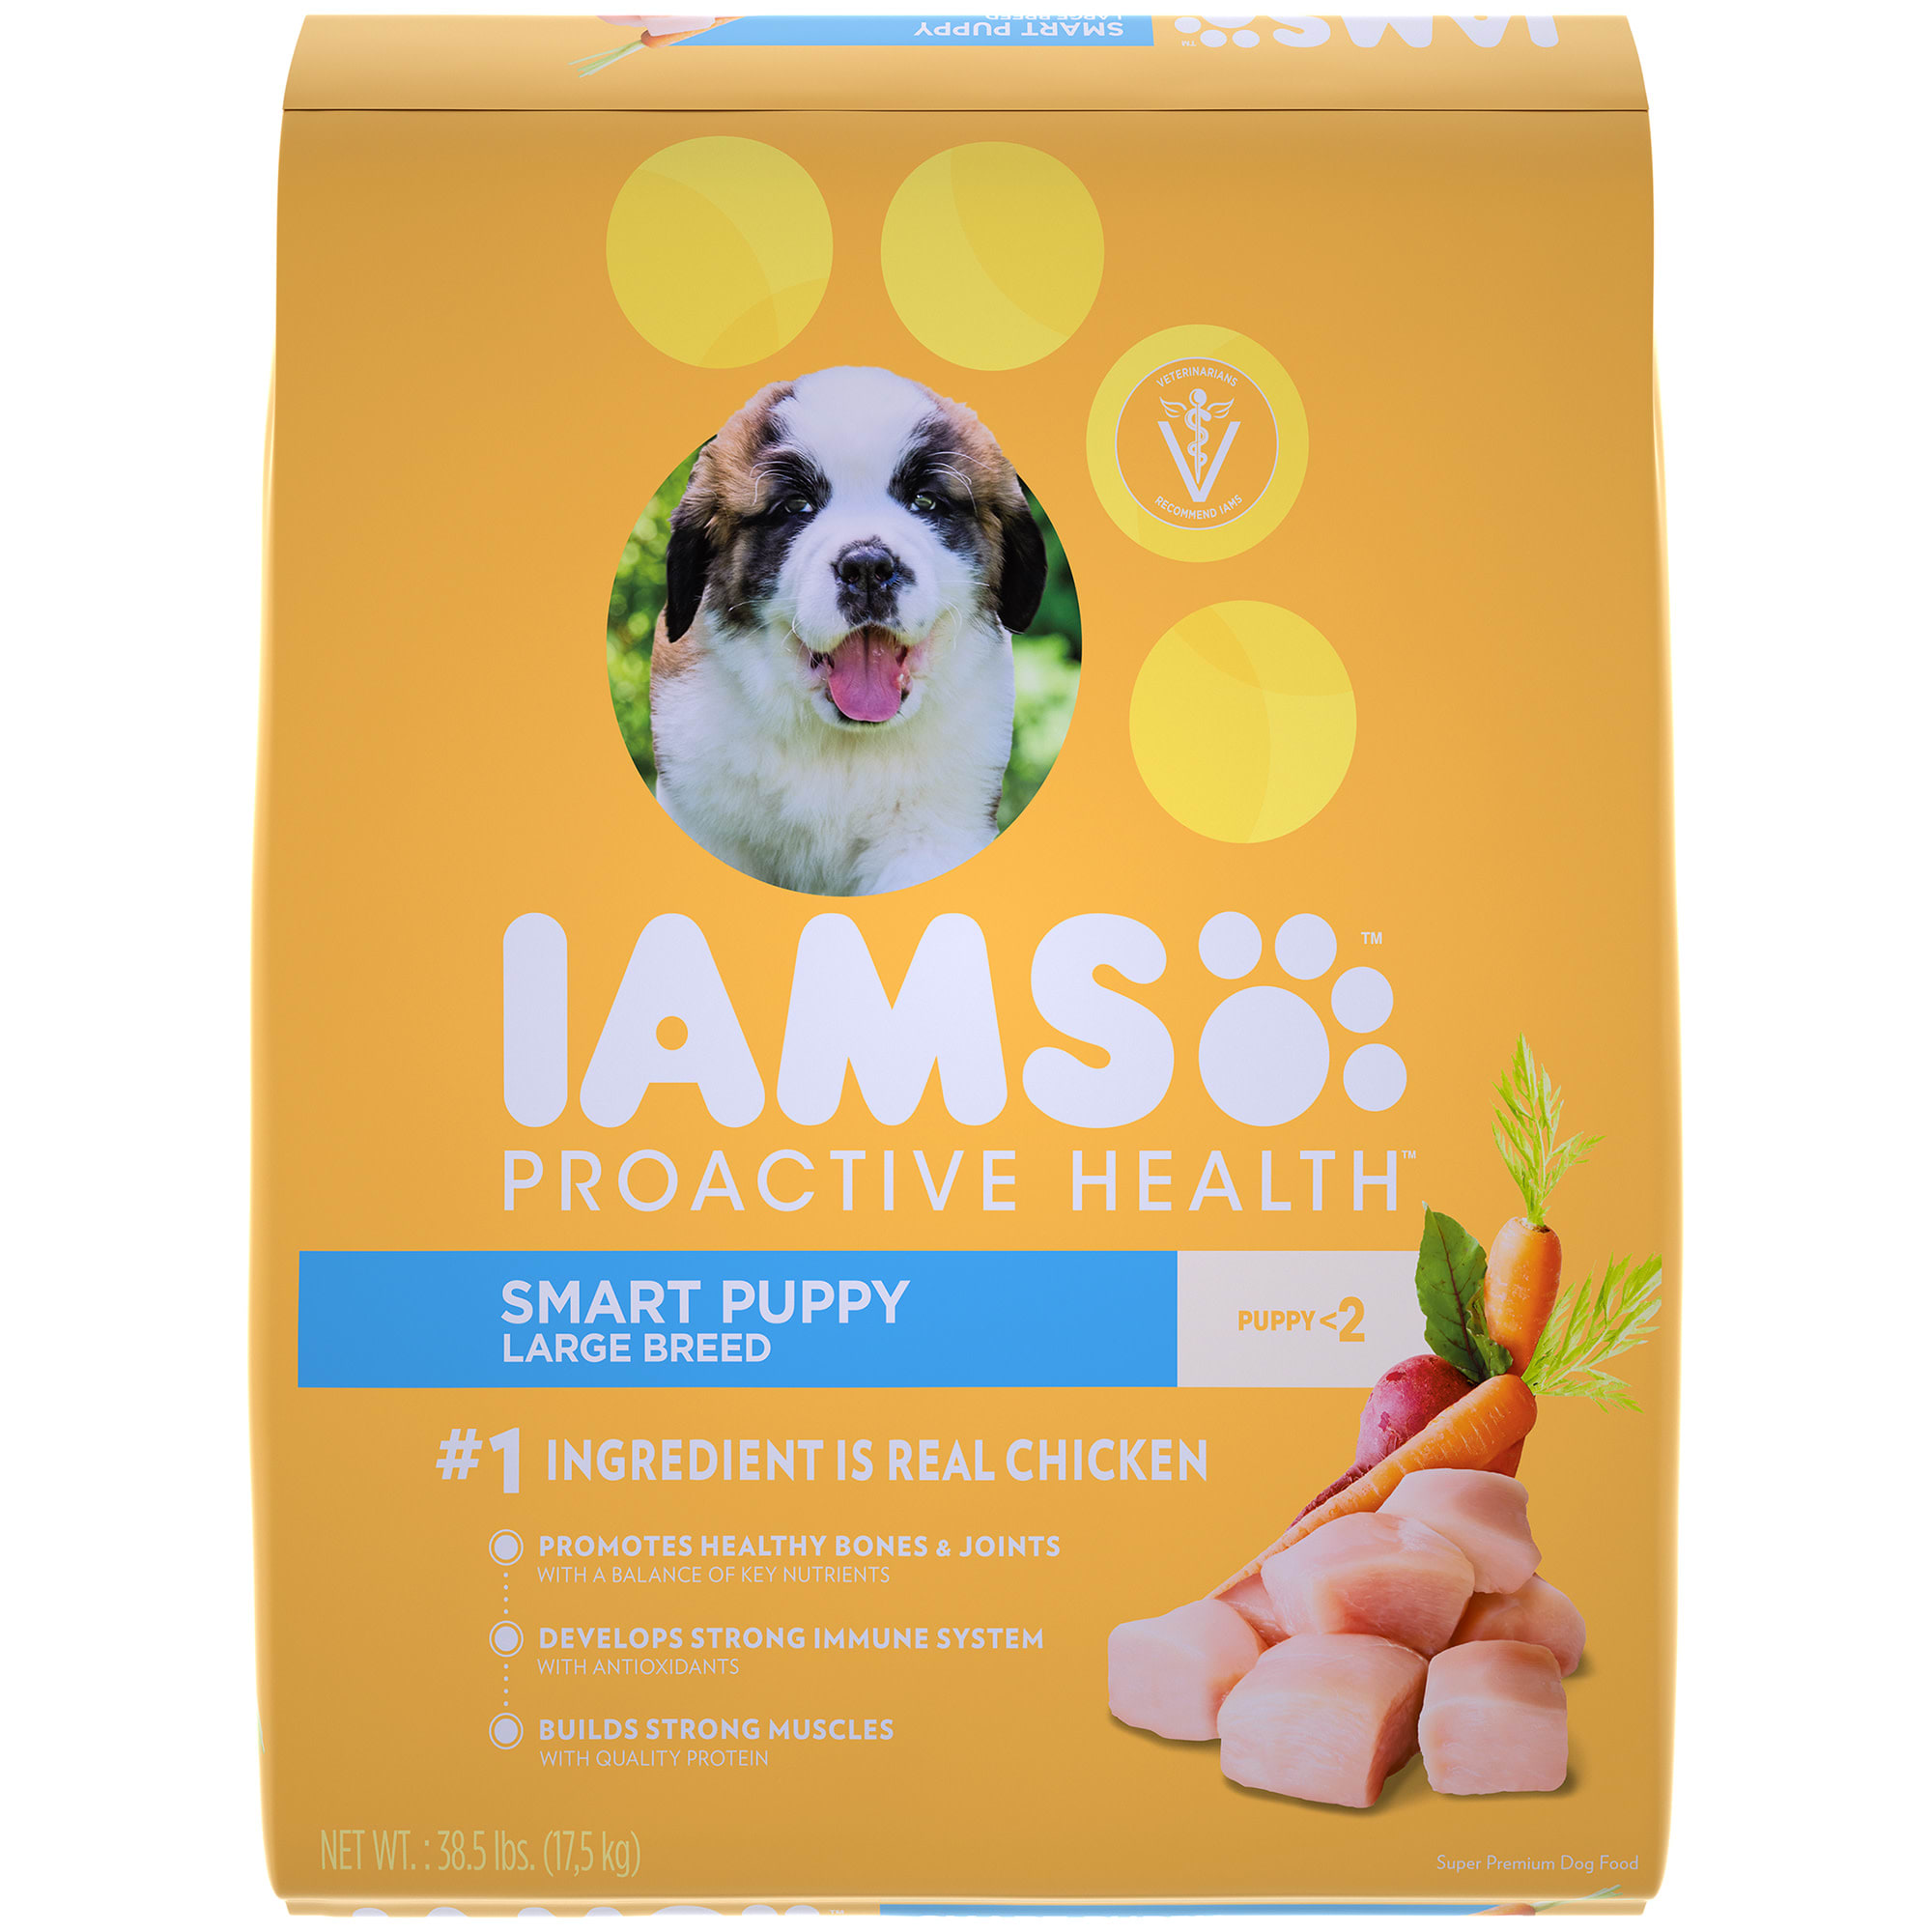 UPC 019014700783 product image for Iams ProActive Health Smart Puppy with Real Chicken Large Breed Dry Food, 38.5 l | upcitemdb.com